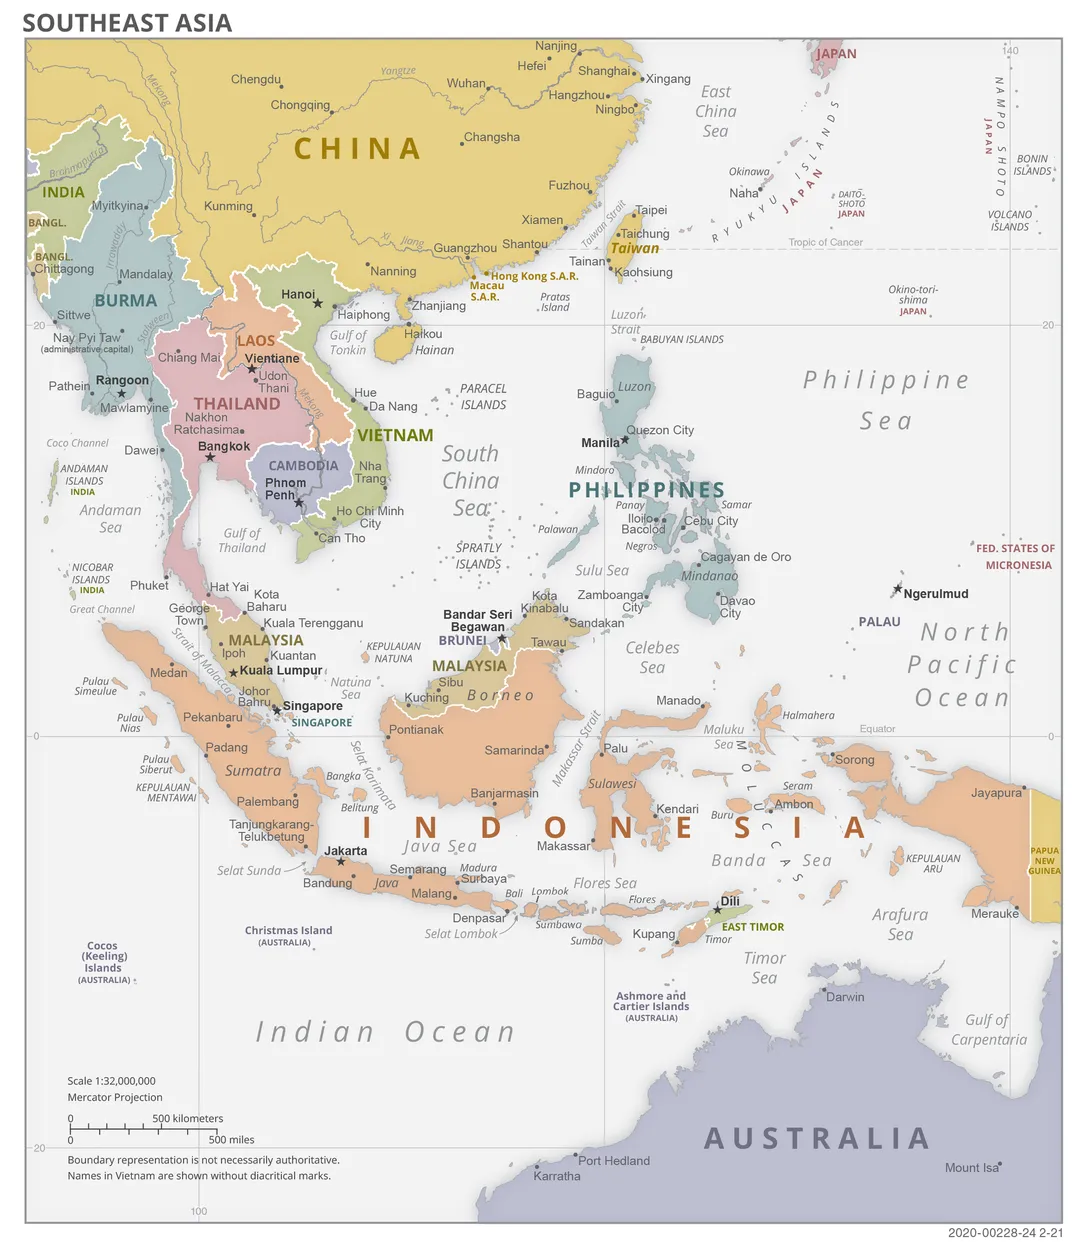 2020 map of Southeast Asia